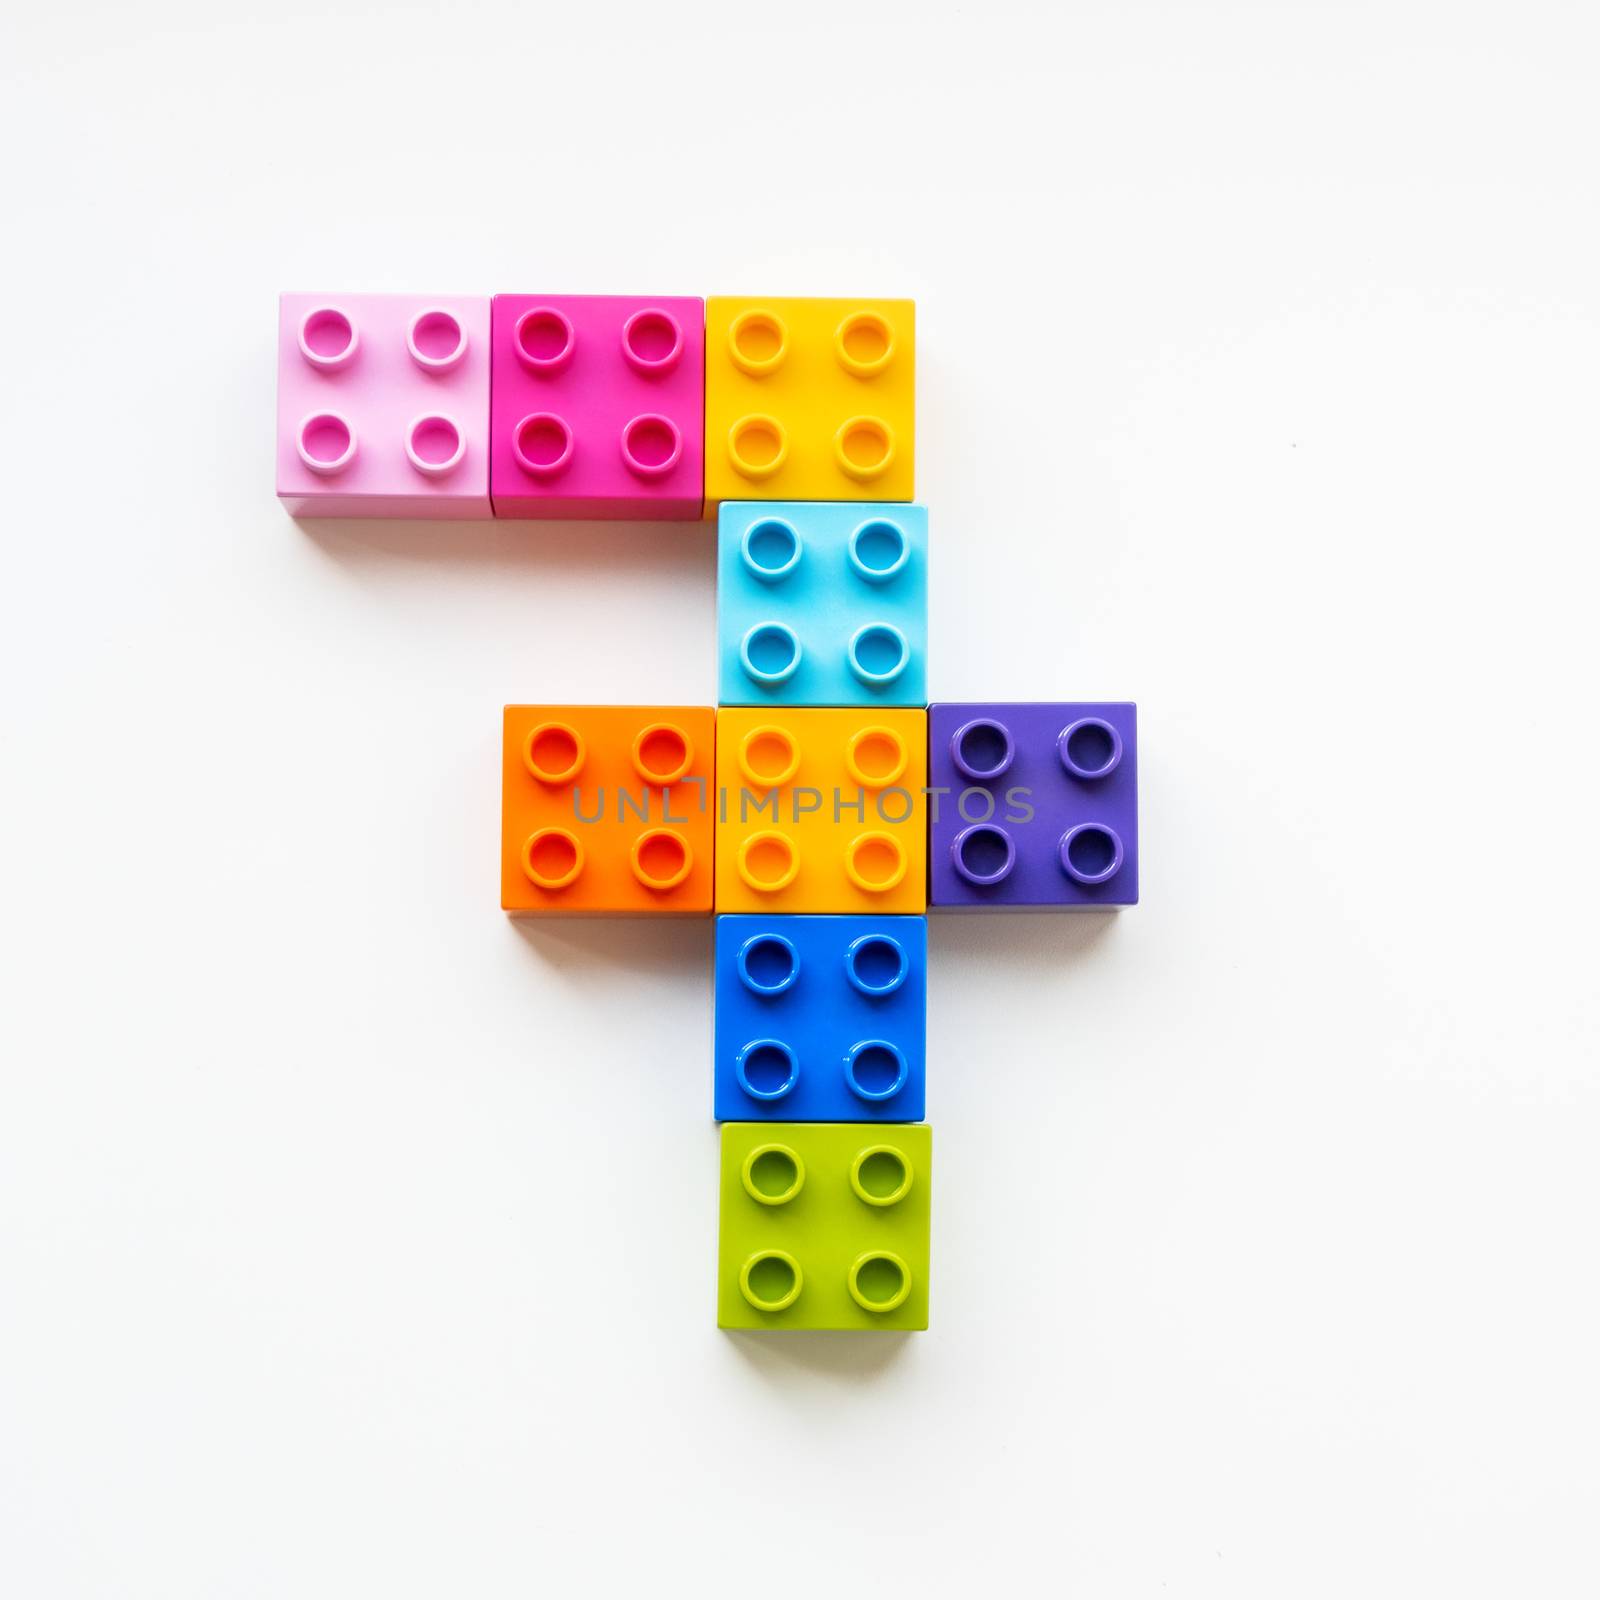 Number Seven made of colorful constructor blocks. Toy bricks lyi by aksenovko